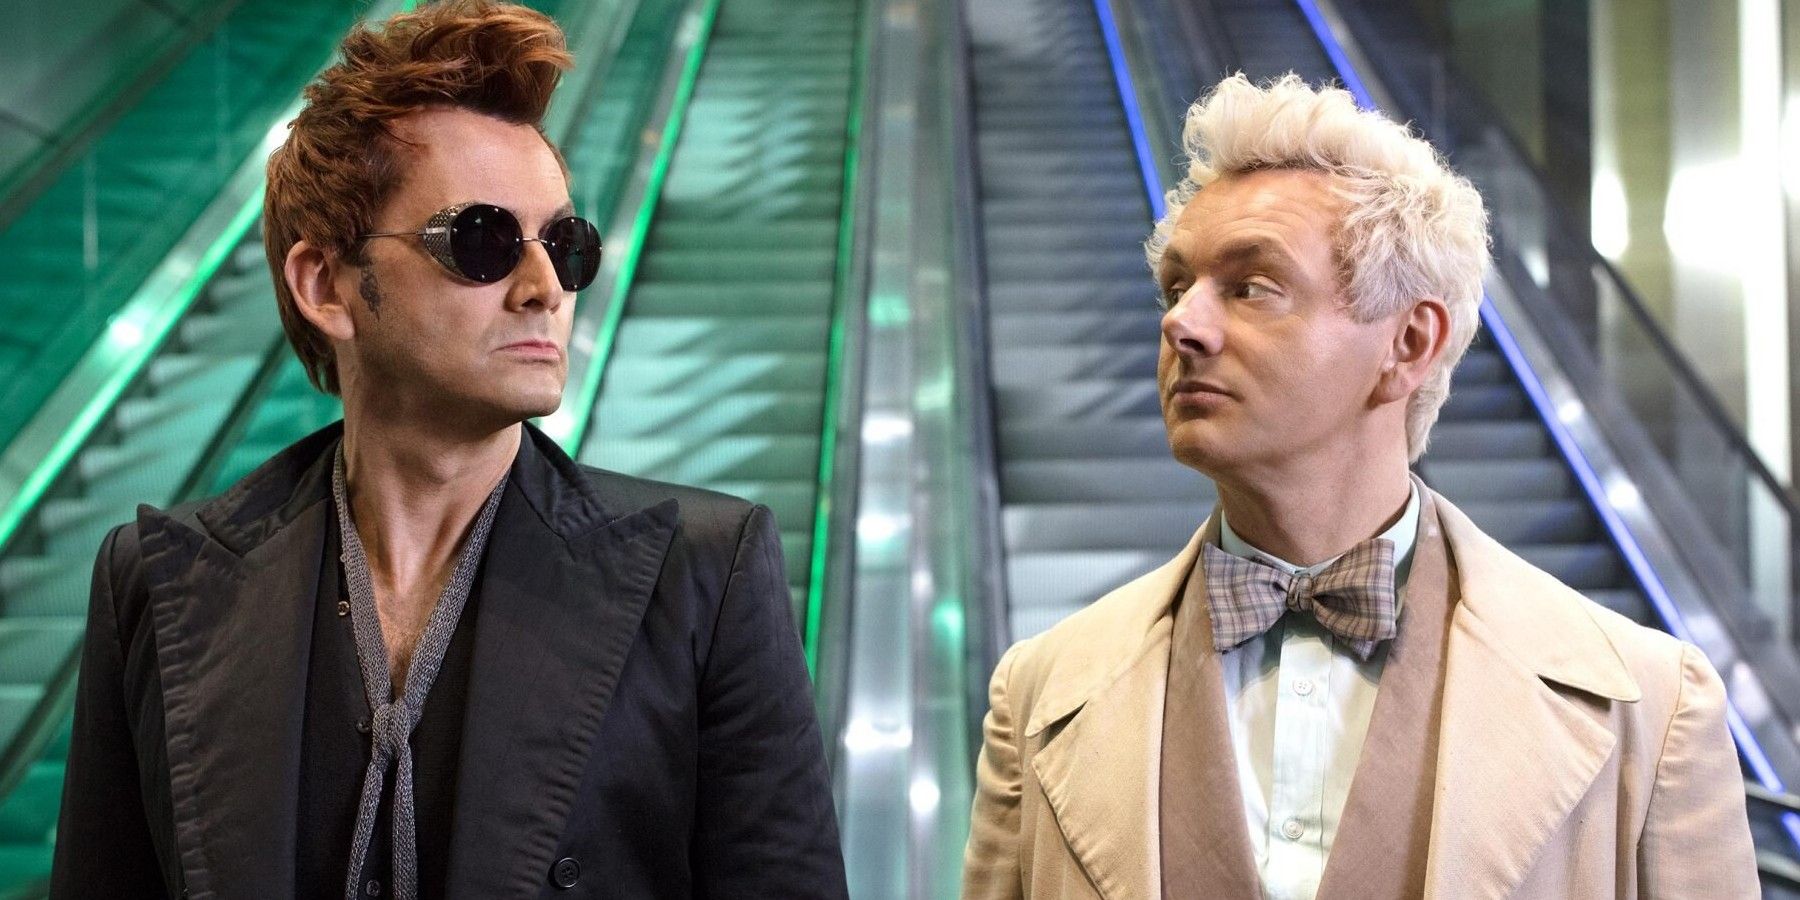 David Tennant and Michael Sheen give knowing looks in Good Omens.